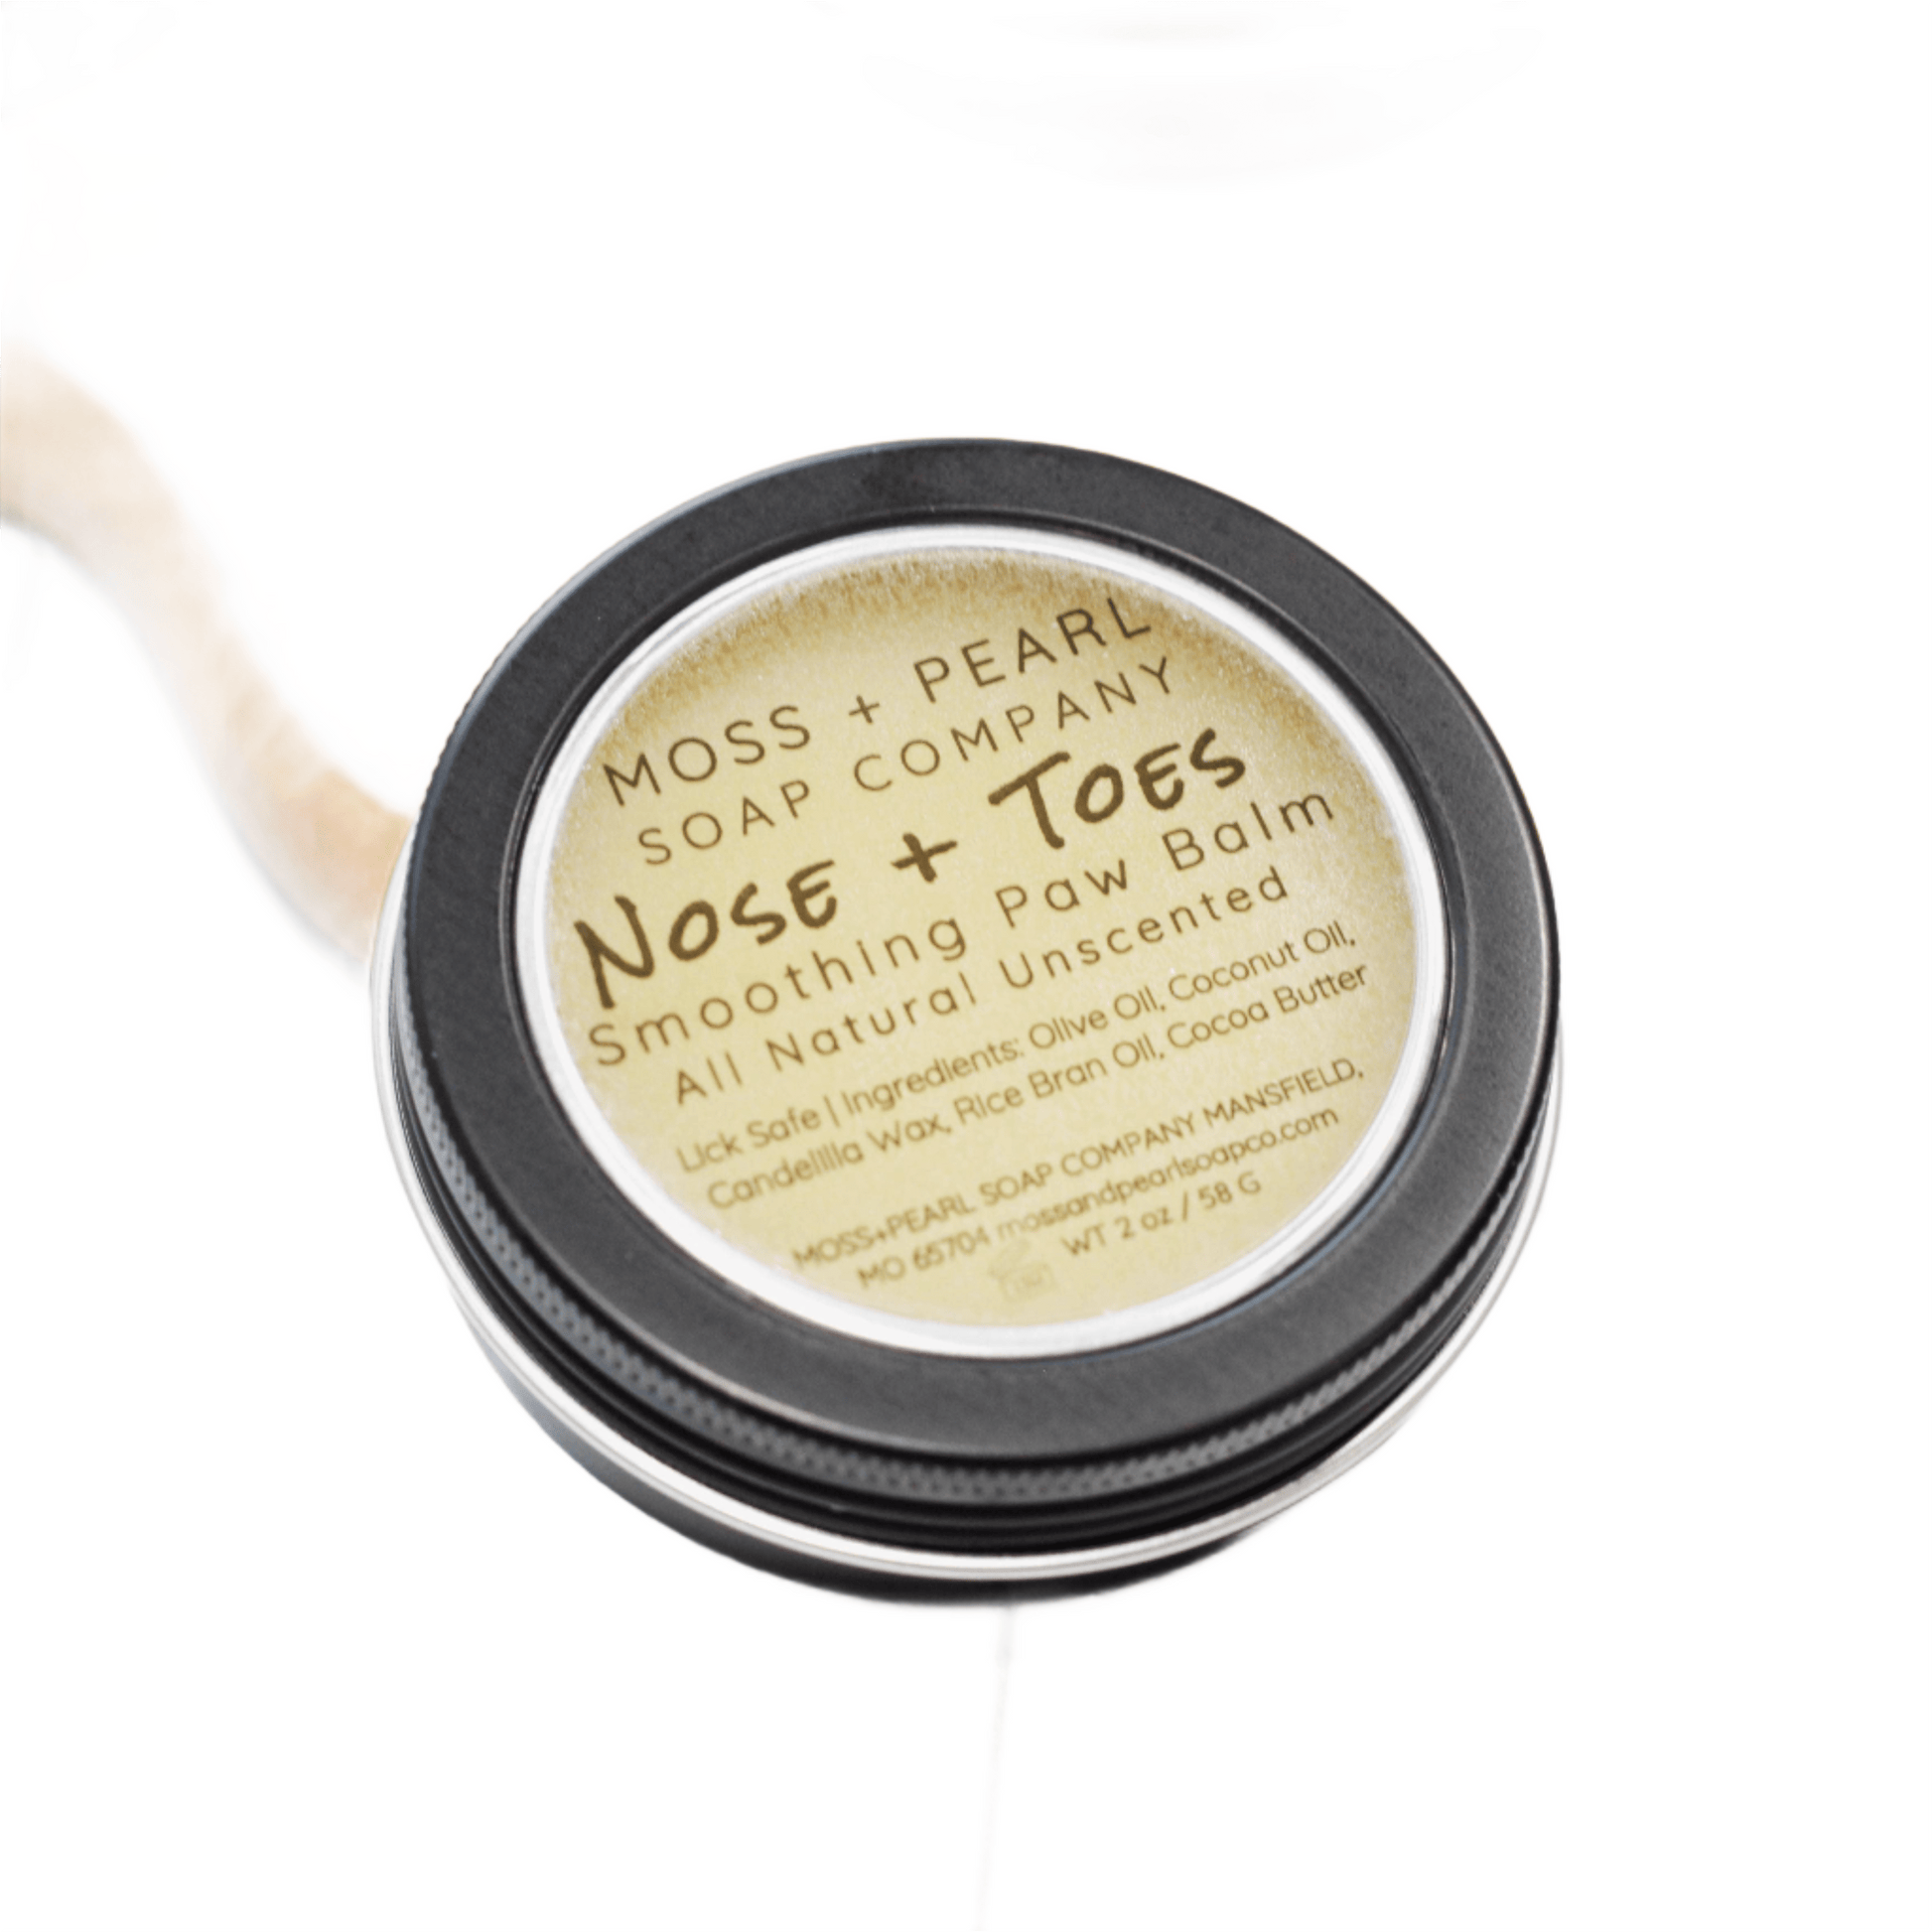 Moss + Pearl Soap Company pet balm Dog Nose and Toes smoothing Paw Balm